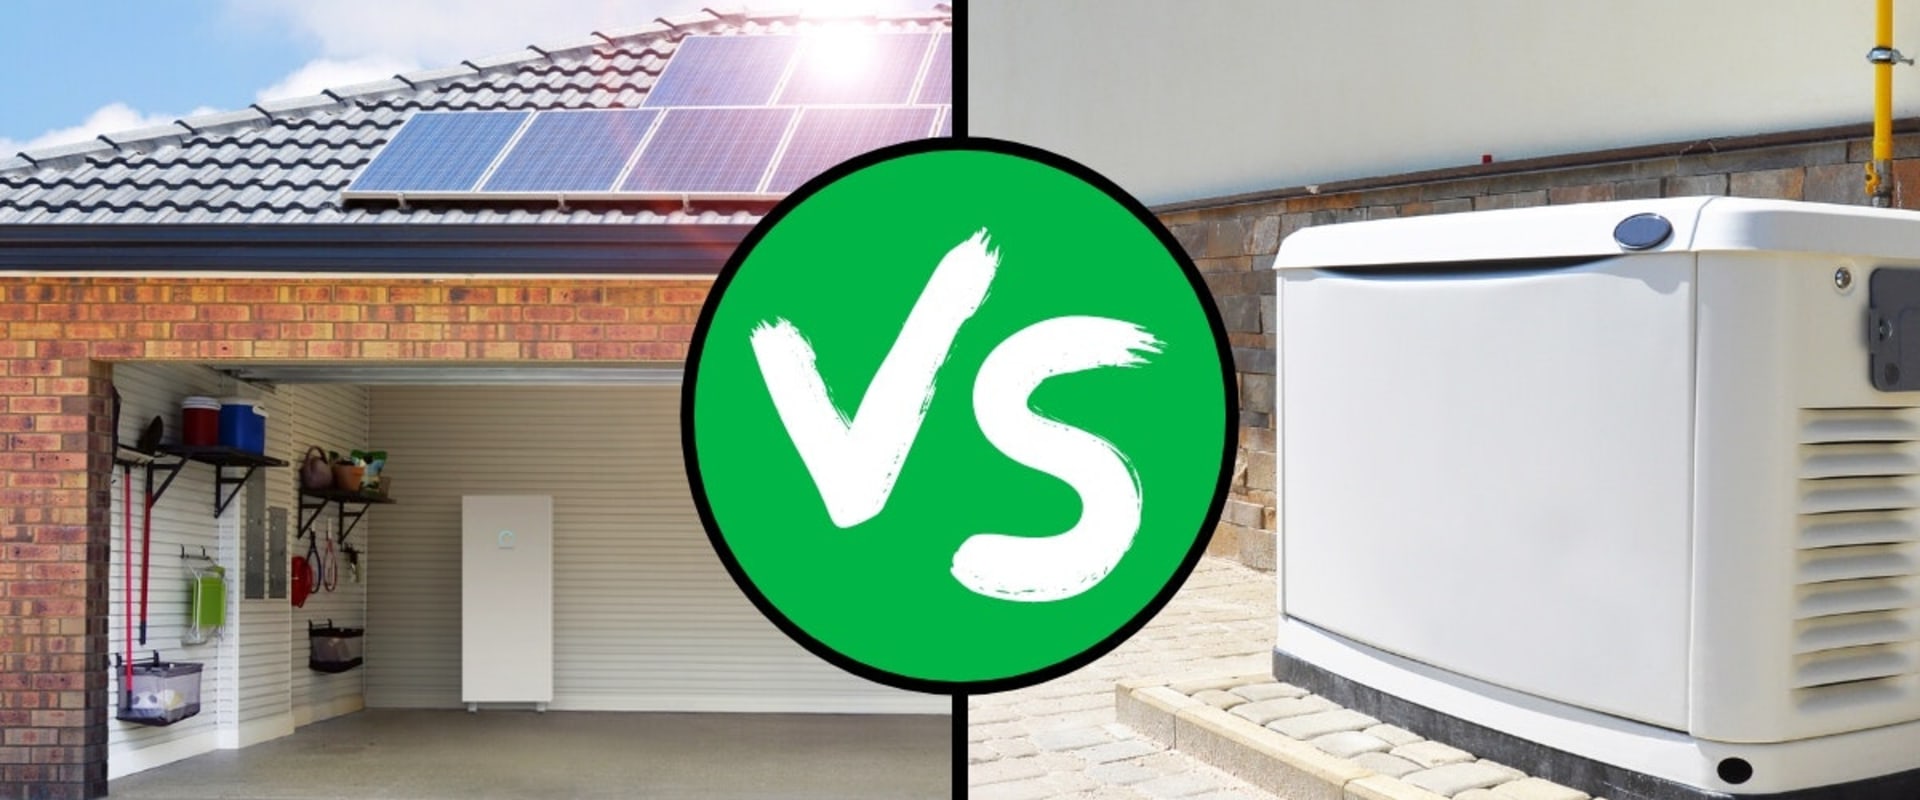 Can Solar Panels Power Your Home During a Power Outage?